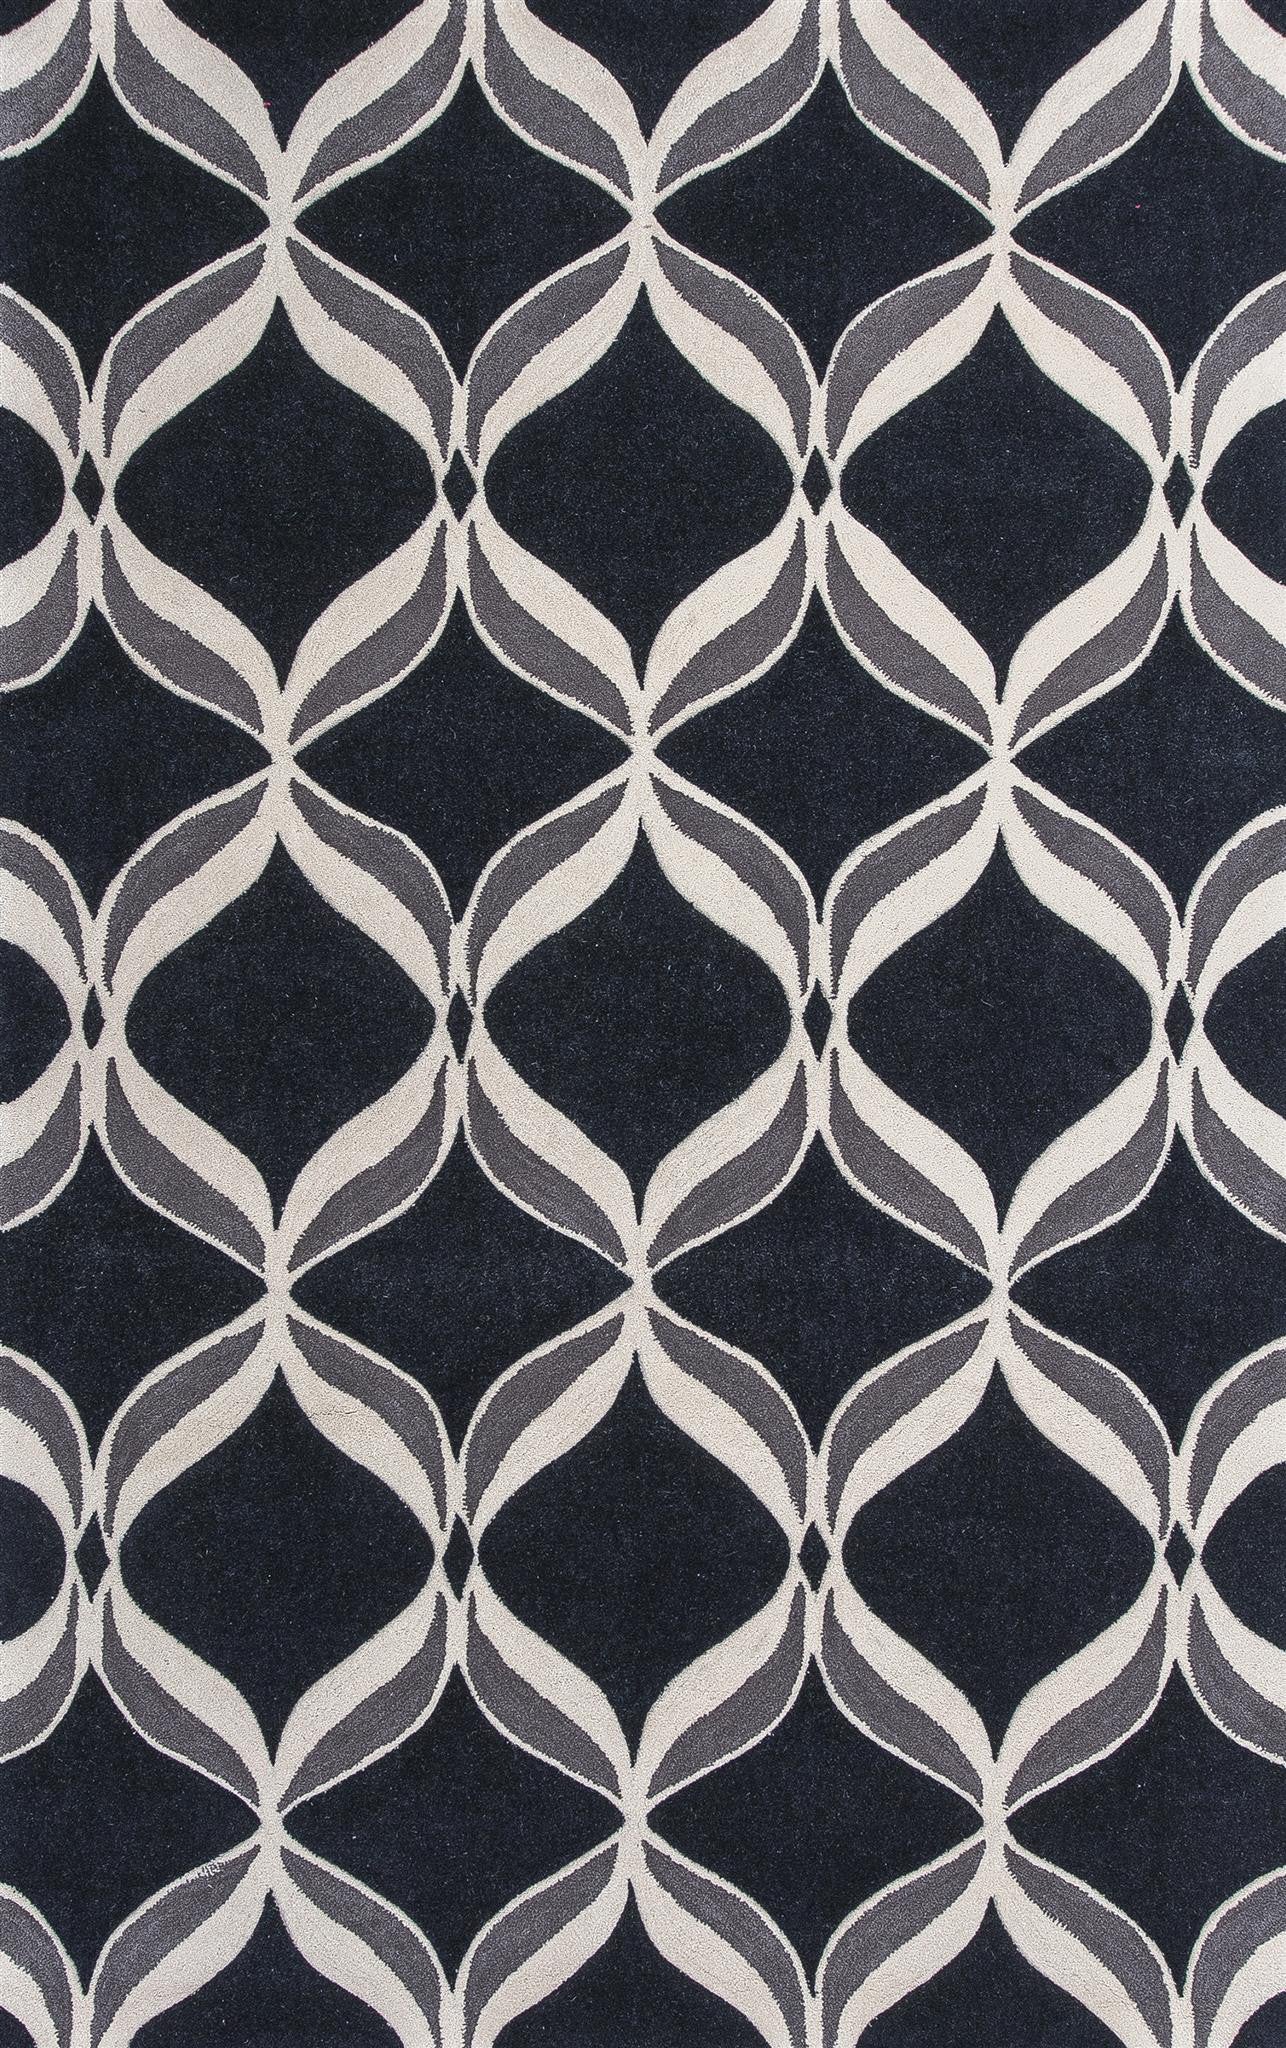 KAS Zolo 3900 Black Ribbons Hand Tufted Area Rug